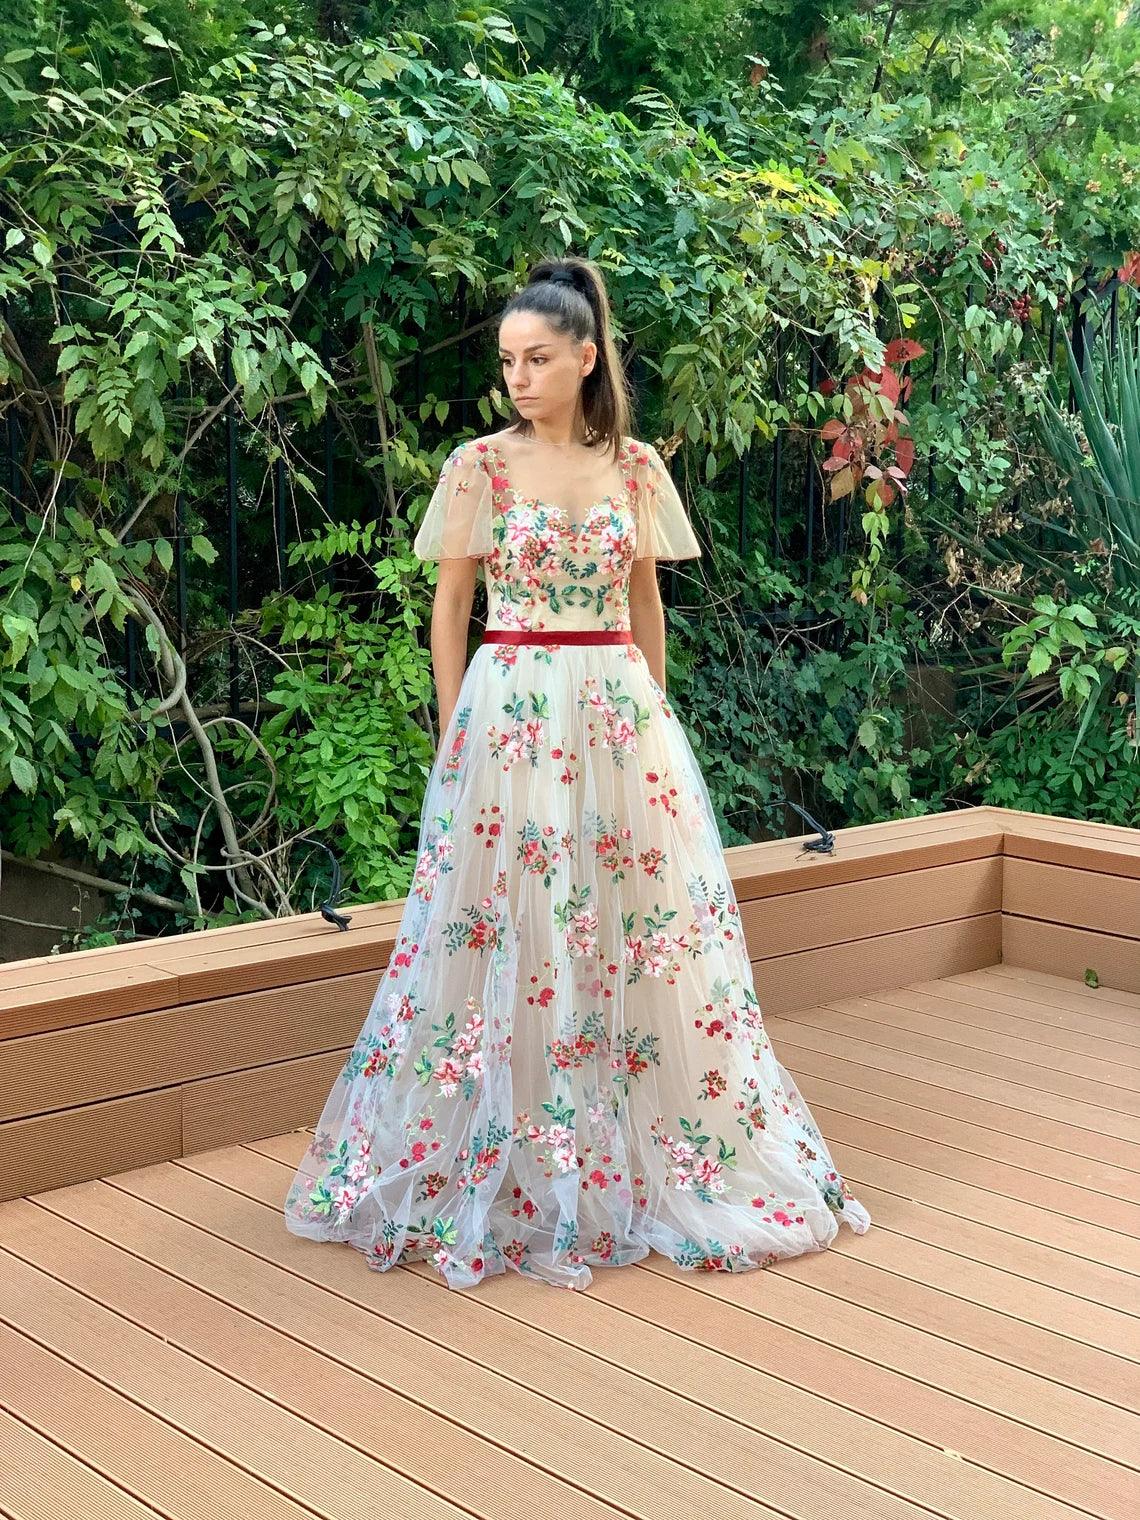 Botanical Blooms gown